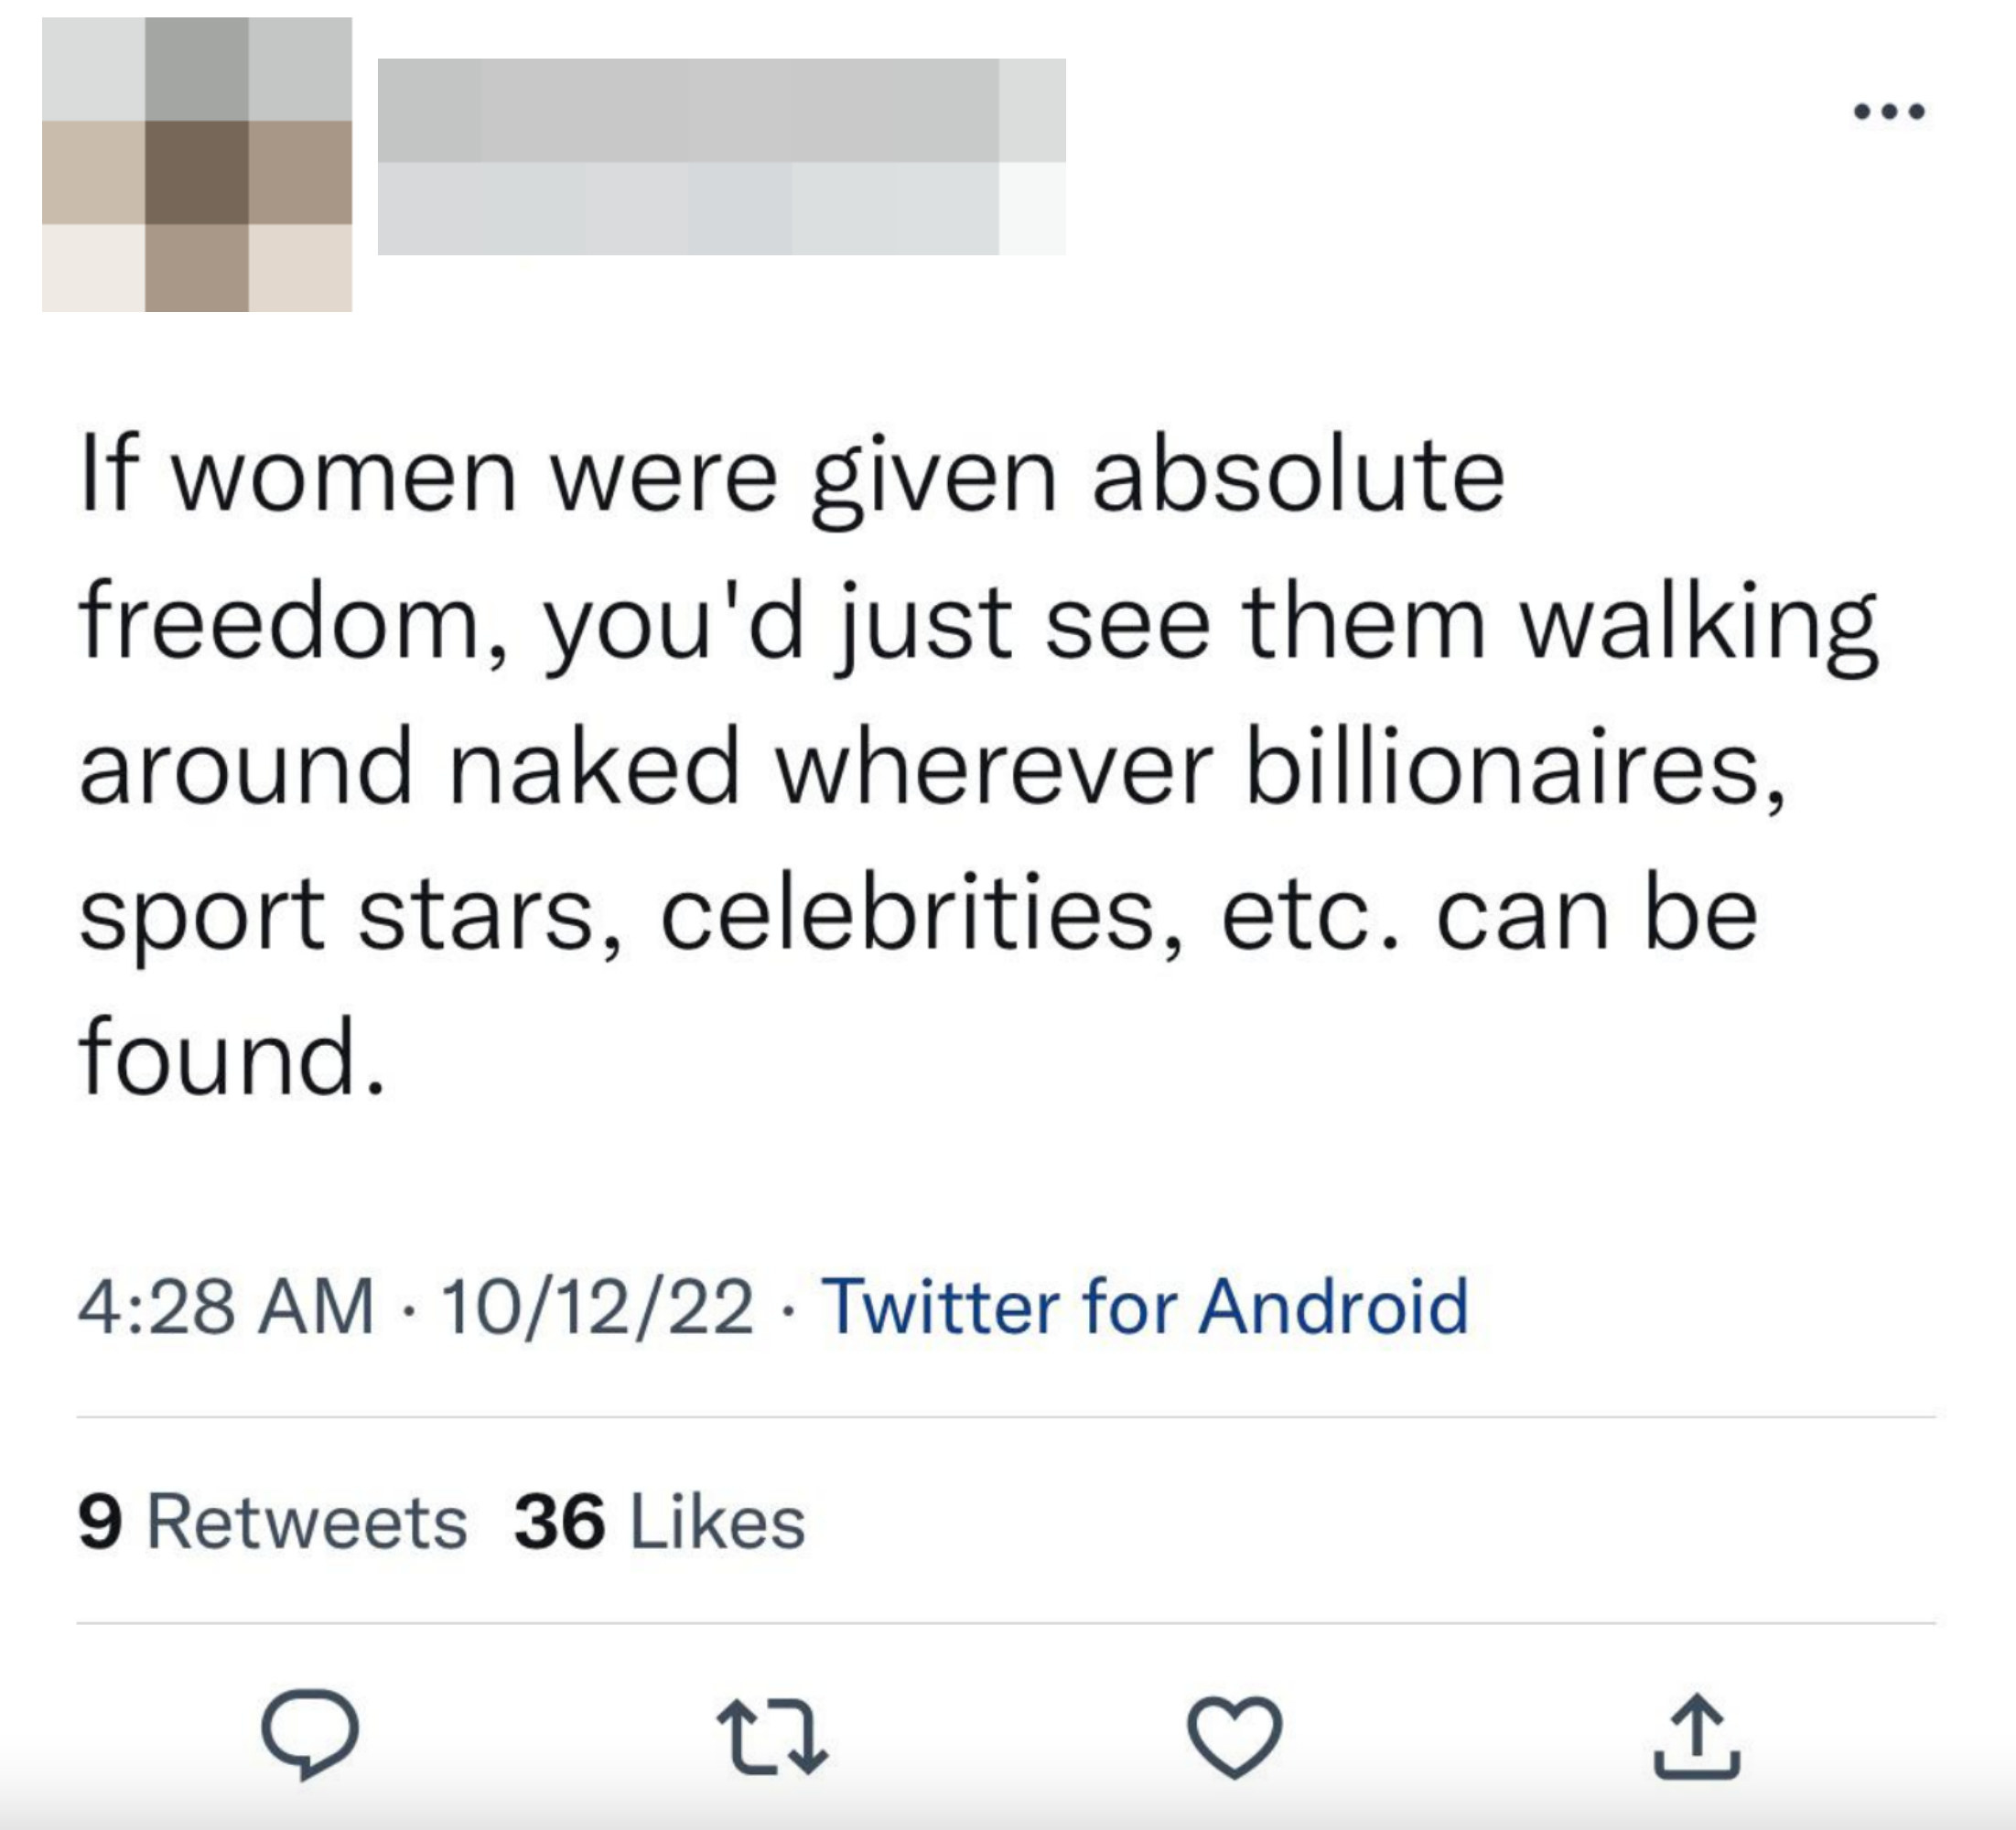 &quot;If women were given absolute freedom, you&#x27;d just see them walking around naked wherever billionaires, sport stars, celebrities, etc. can be found.&quot;